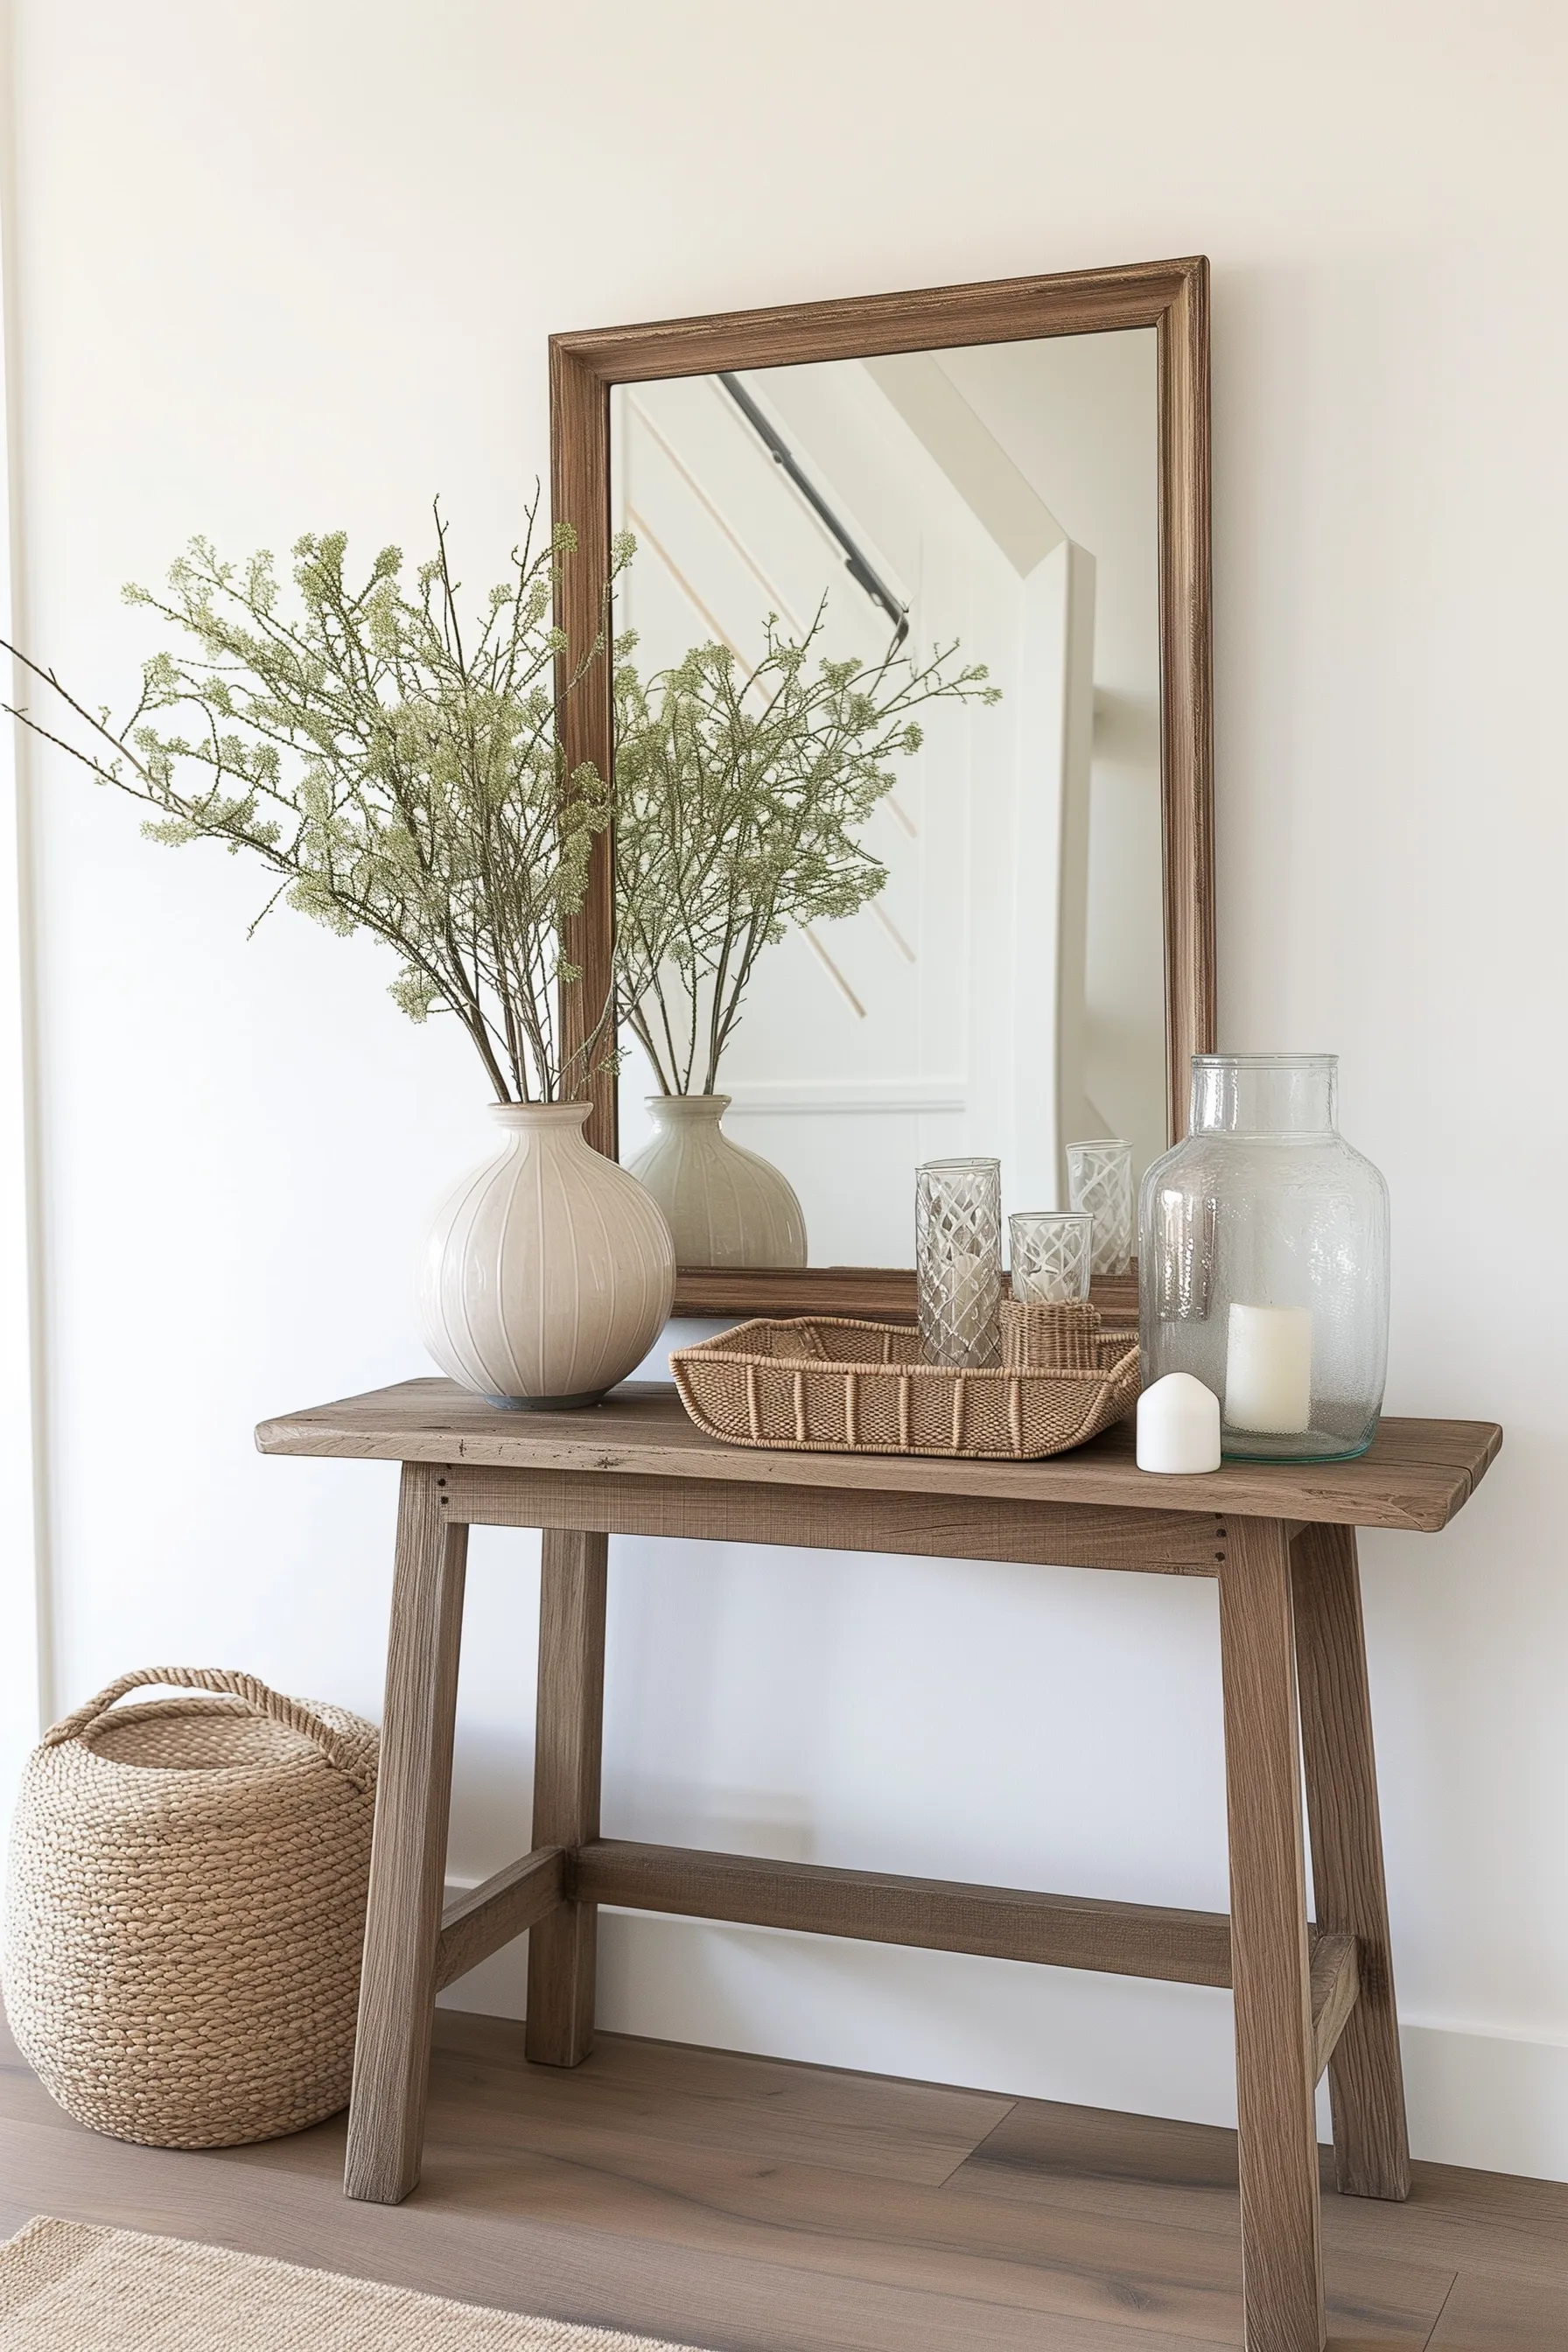 A wooden entry table with a table lamp, vase, and rattan baskets